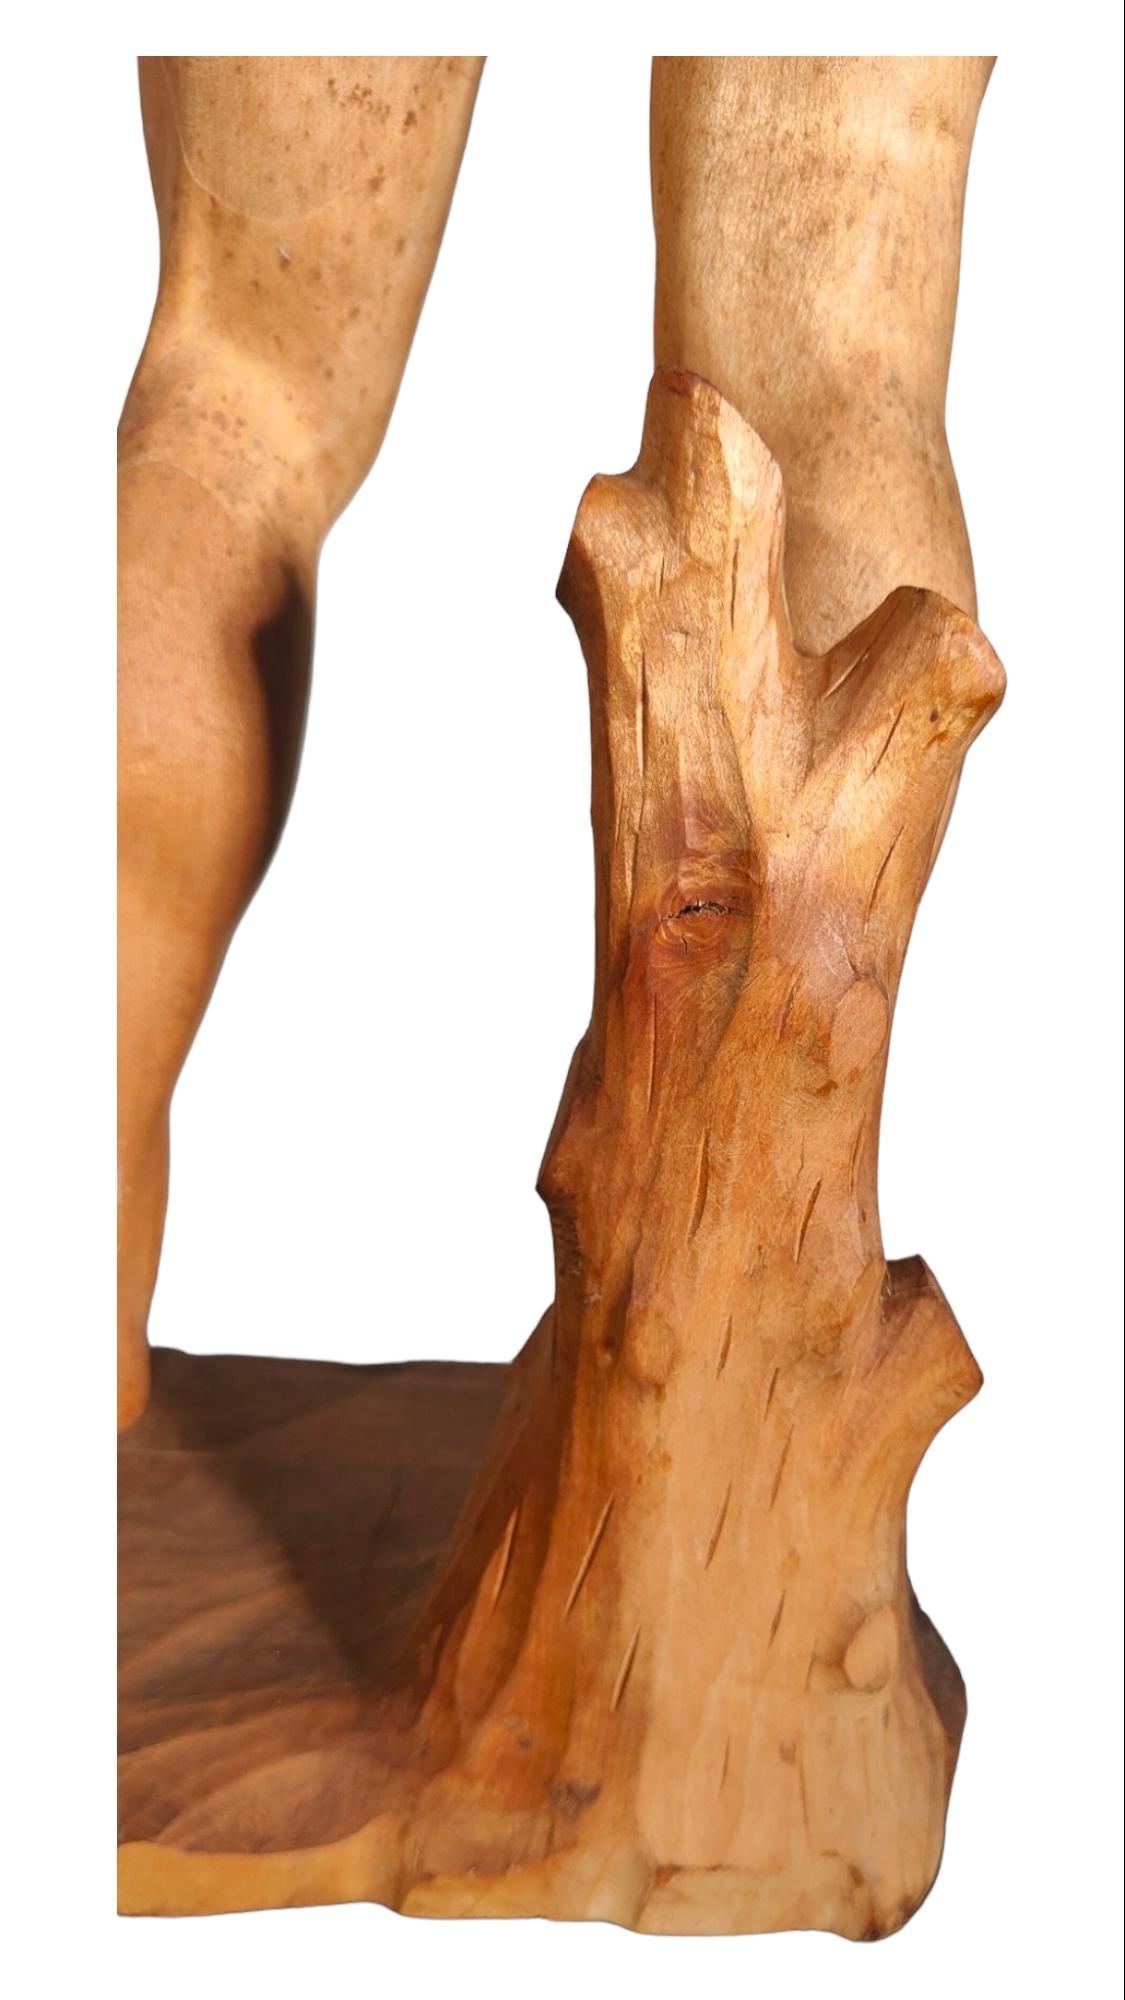 DAVID SCULPTURE IN WOOd For Sale 11